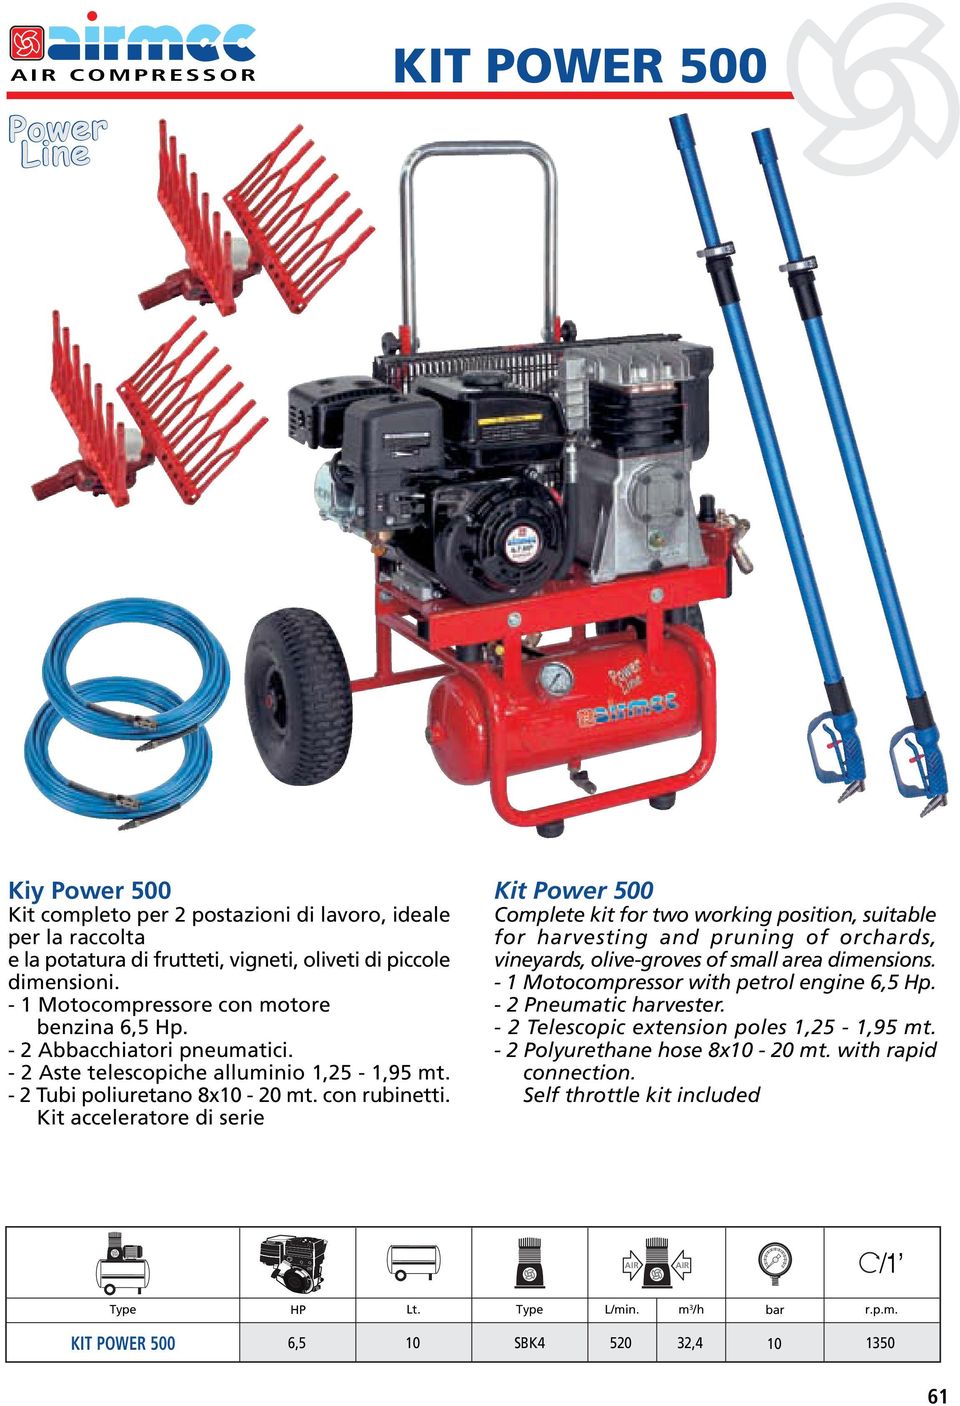 Kit acceleratore di serie Kit Power 500 Complete kit for two working position, suitable for harvesting and pruning of orchards, vineyards, olive-groves of small area dimensions.